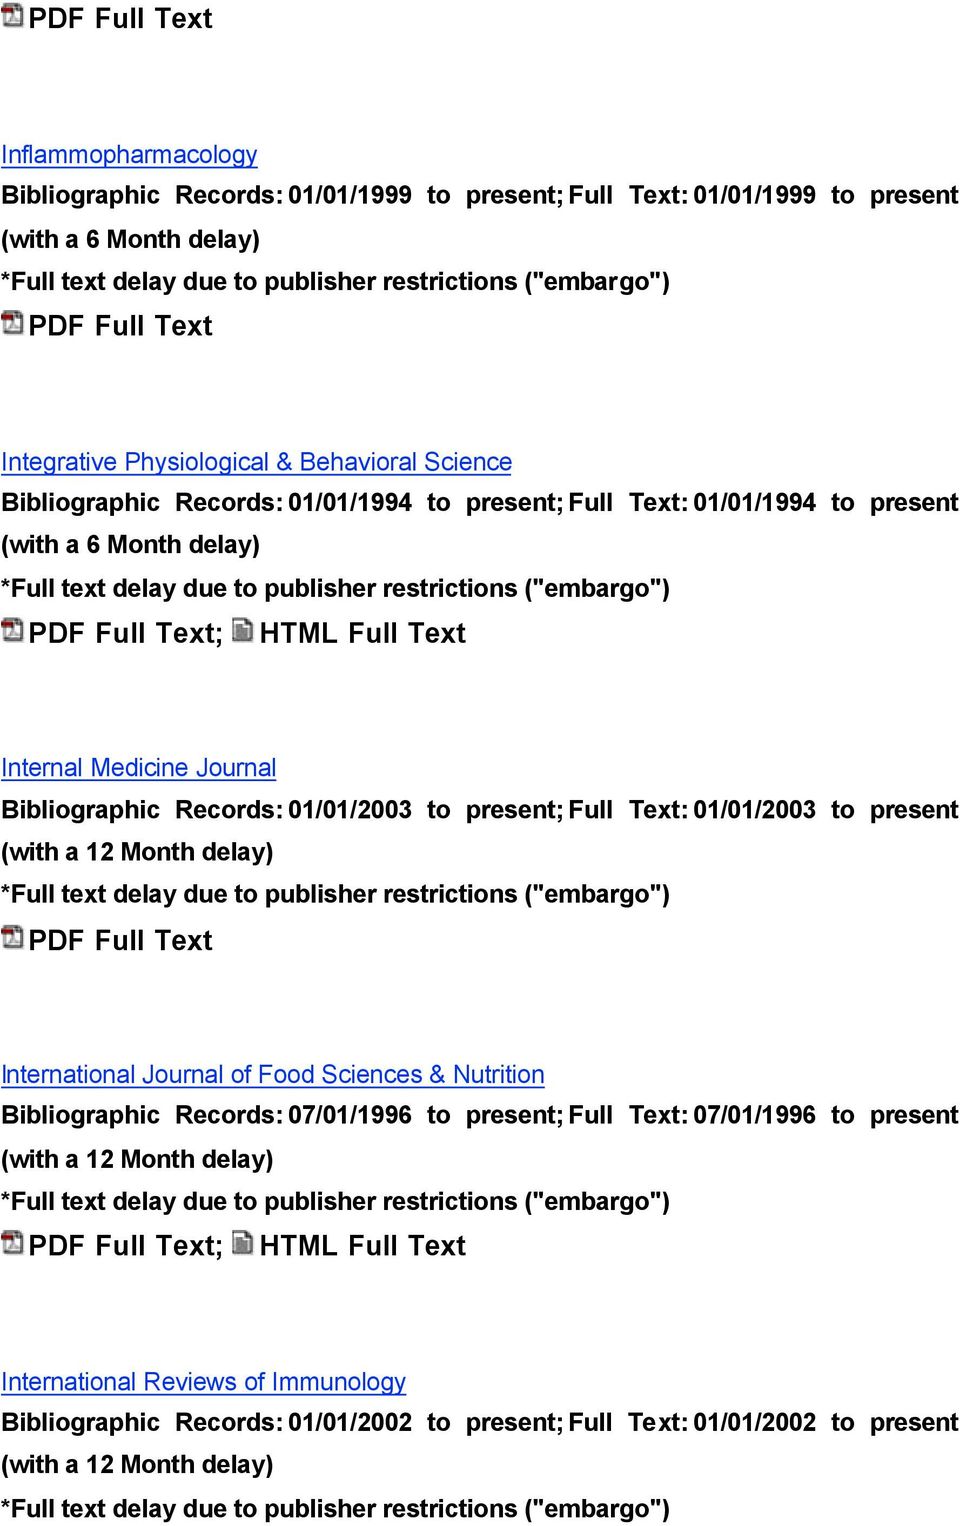 Bibliographic Records: 01/01/2003 to present; Full Text: 01/01/2003 to present International Journal of Food Sciences & Nutrition Bibliographic Records: 07/01/1996